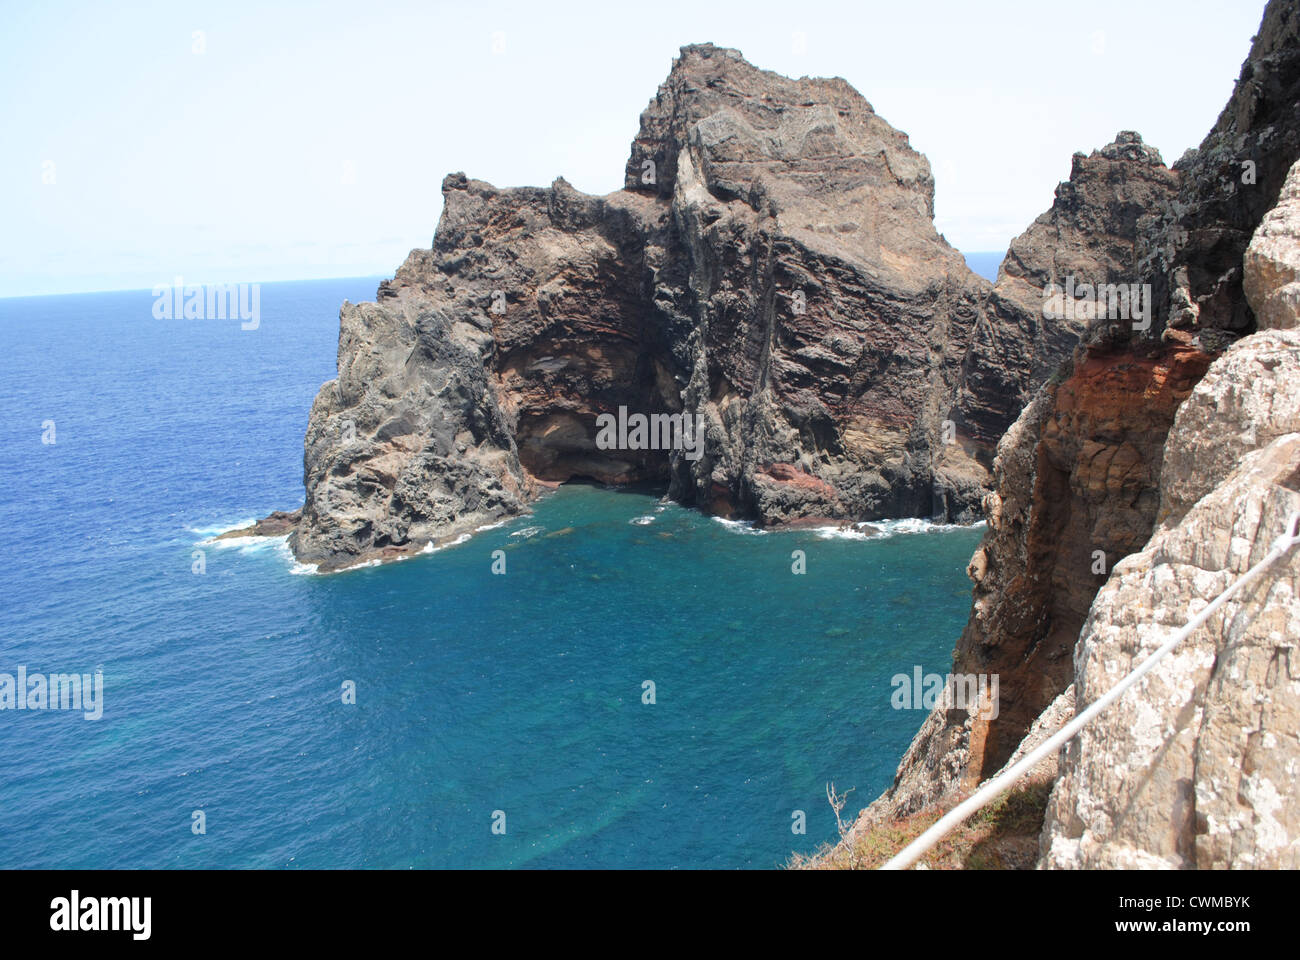 Image of volcanic rocks in blue ocean in Madeira Portugal Stock Photo